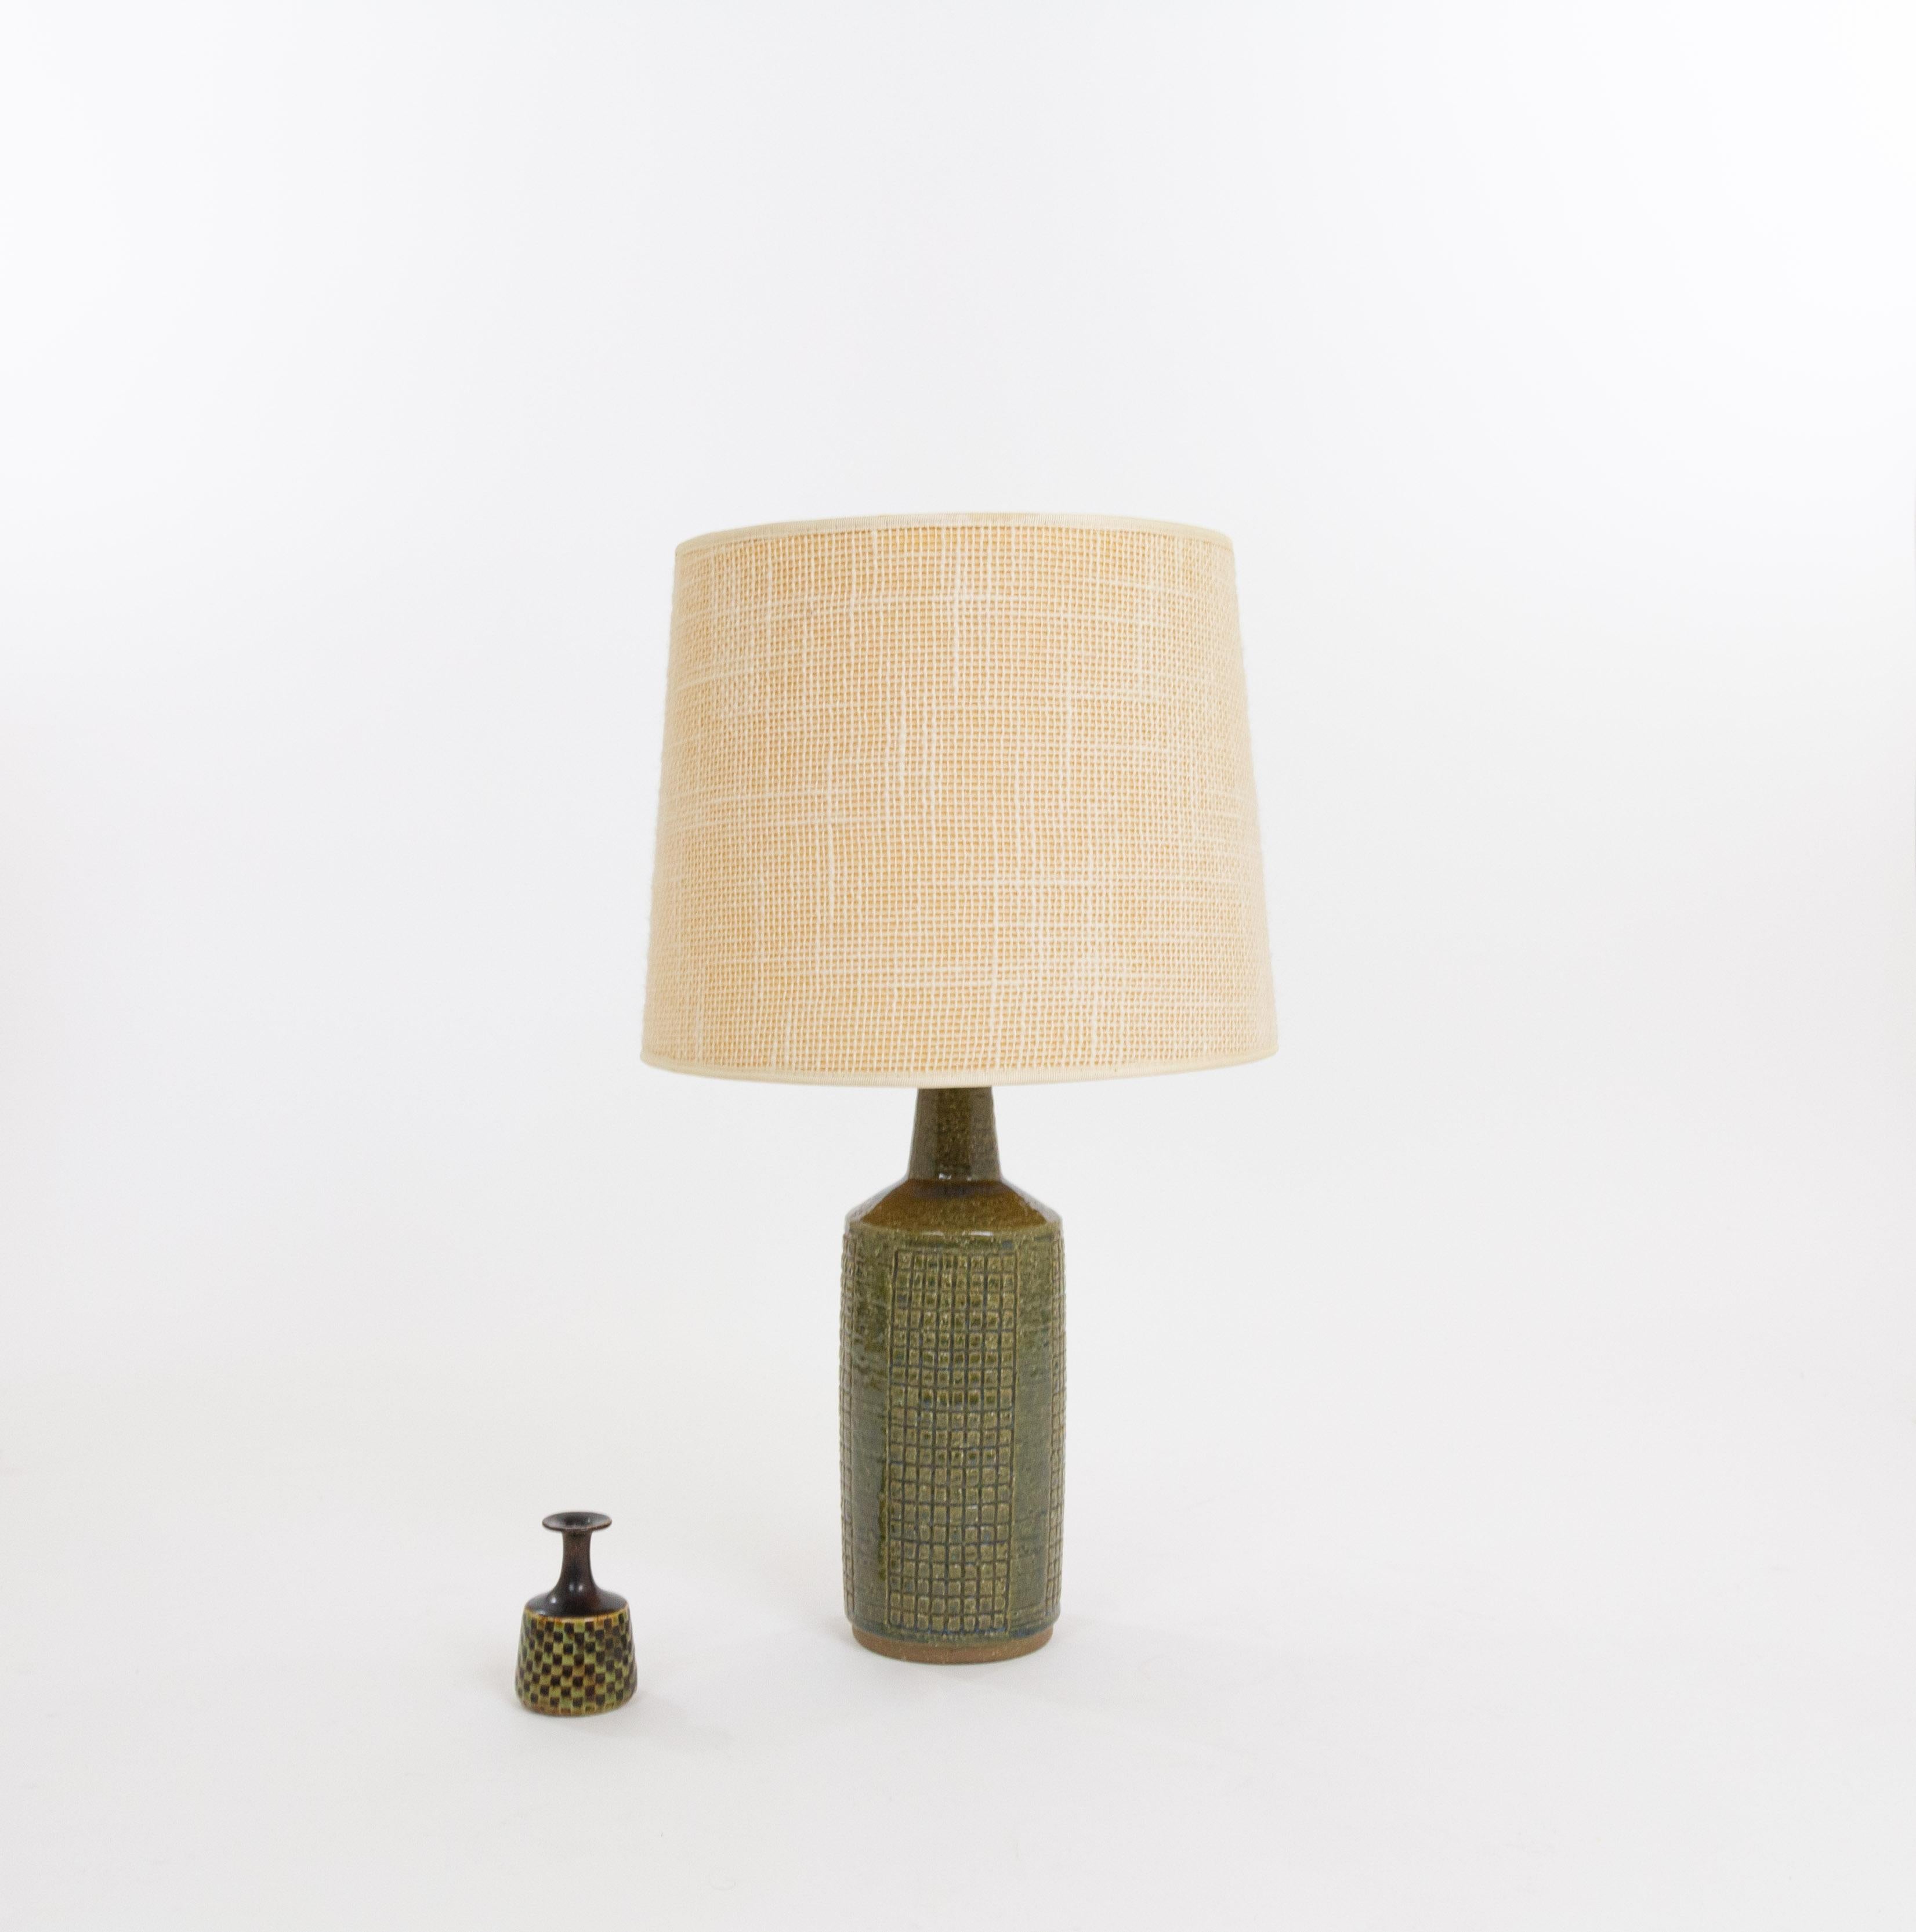 Model DL/30 table lamp made by Annelise and Per Linnemann-Schmidt for Palshus in the 1960s. The colour of the handmade decorated base is Olive Green. It has impressed, geometric patterns.

The lamp comes with its original lampshade holder. The